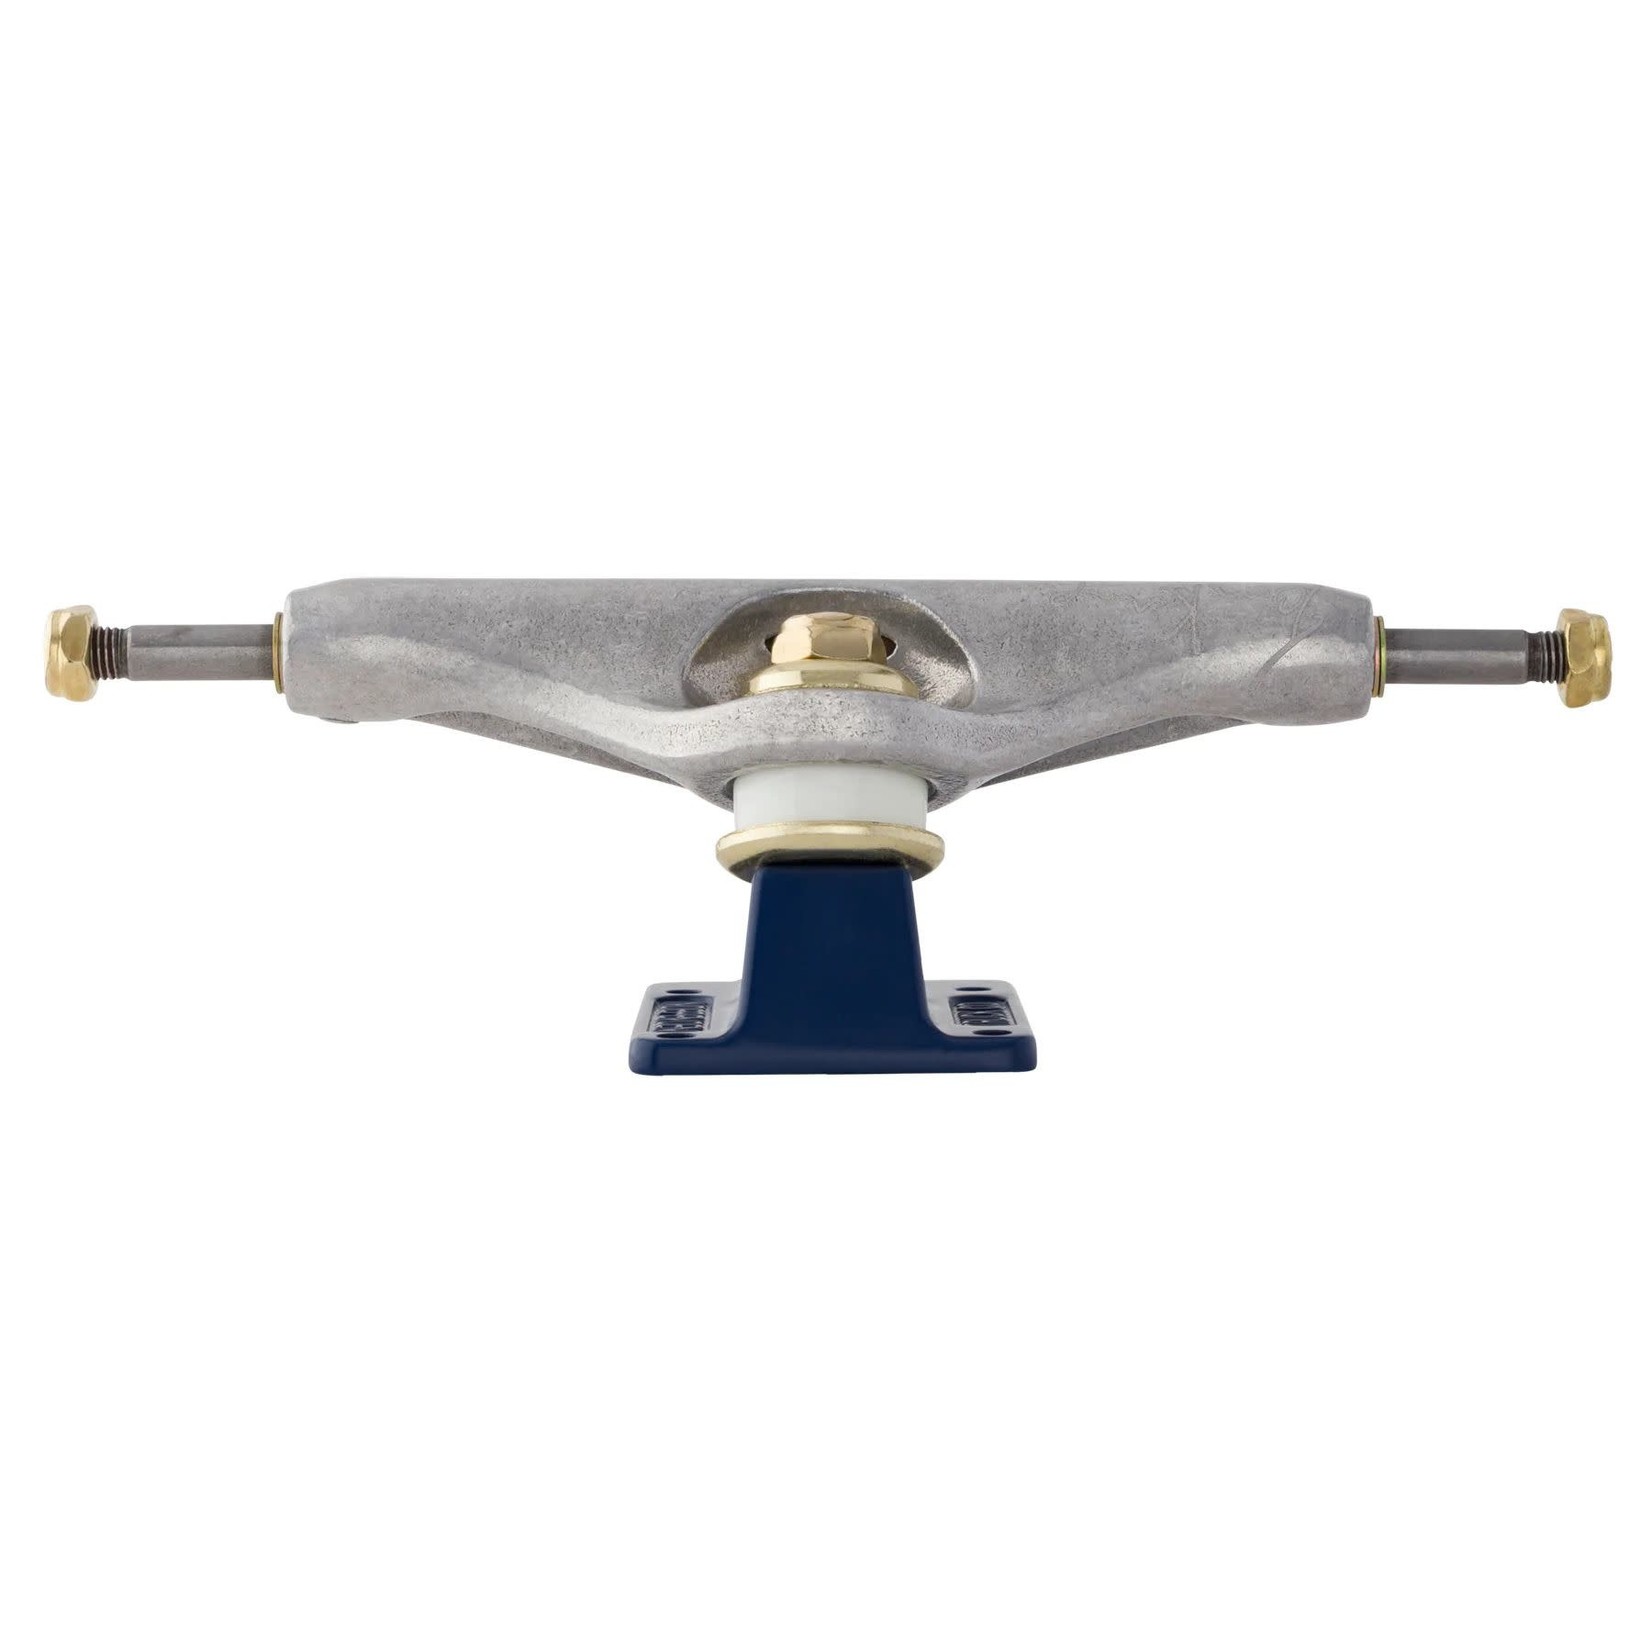 Independent Independent Stage 11 Forged Hollow Knox Trucks - Silver/Blue